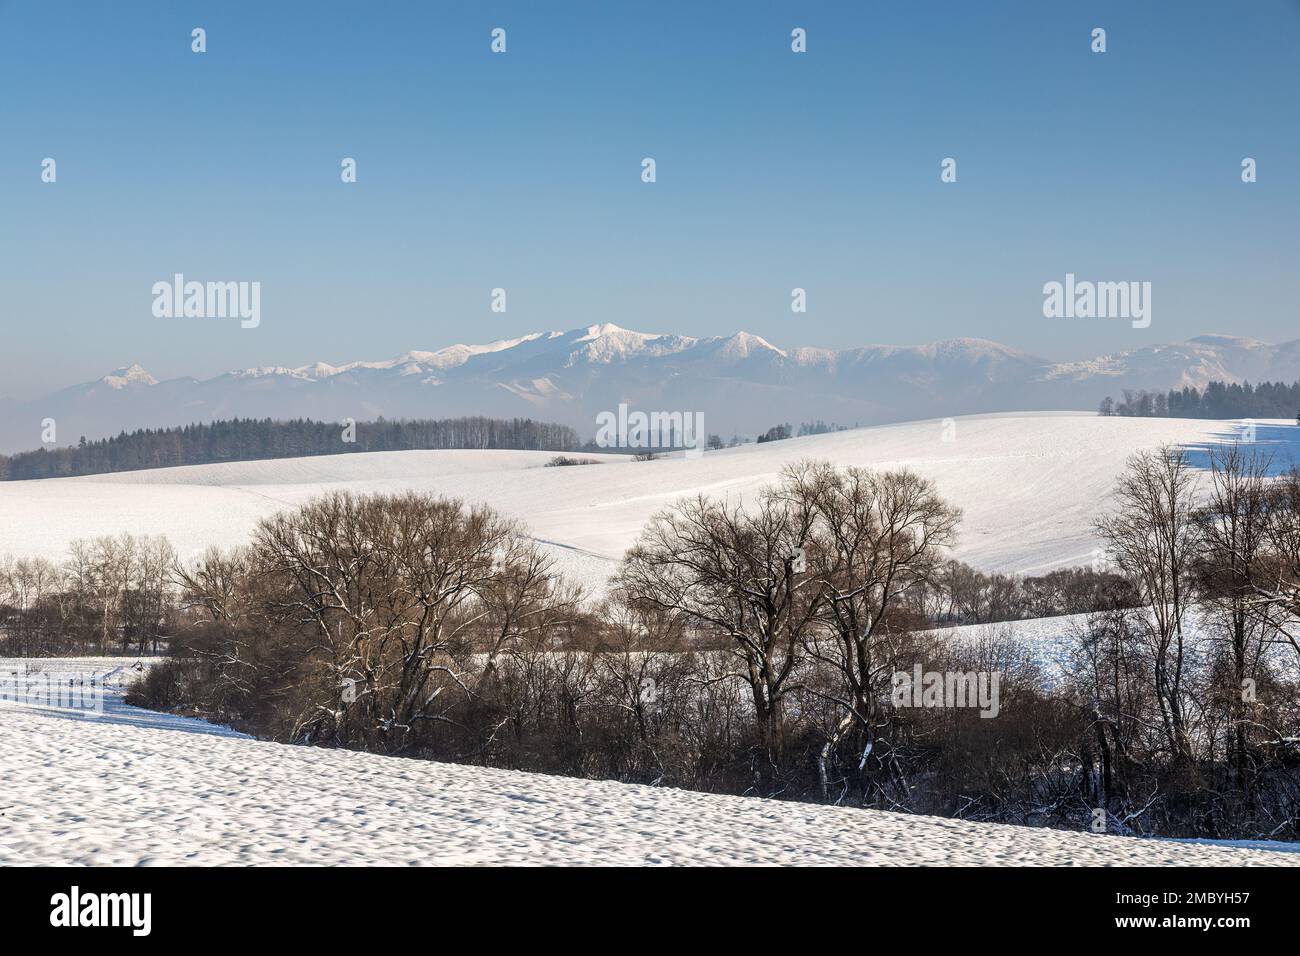 Winter snowy landscape with mountain in background, northwest of Slovakia, Europe. Stock Photo